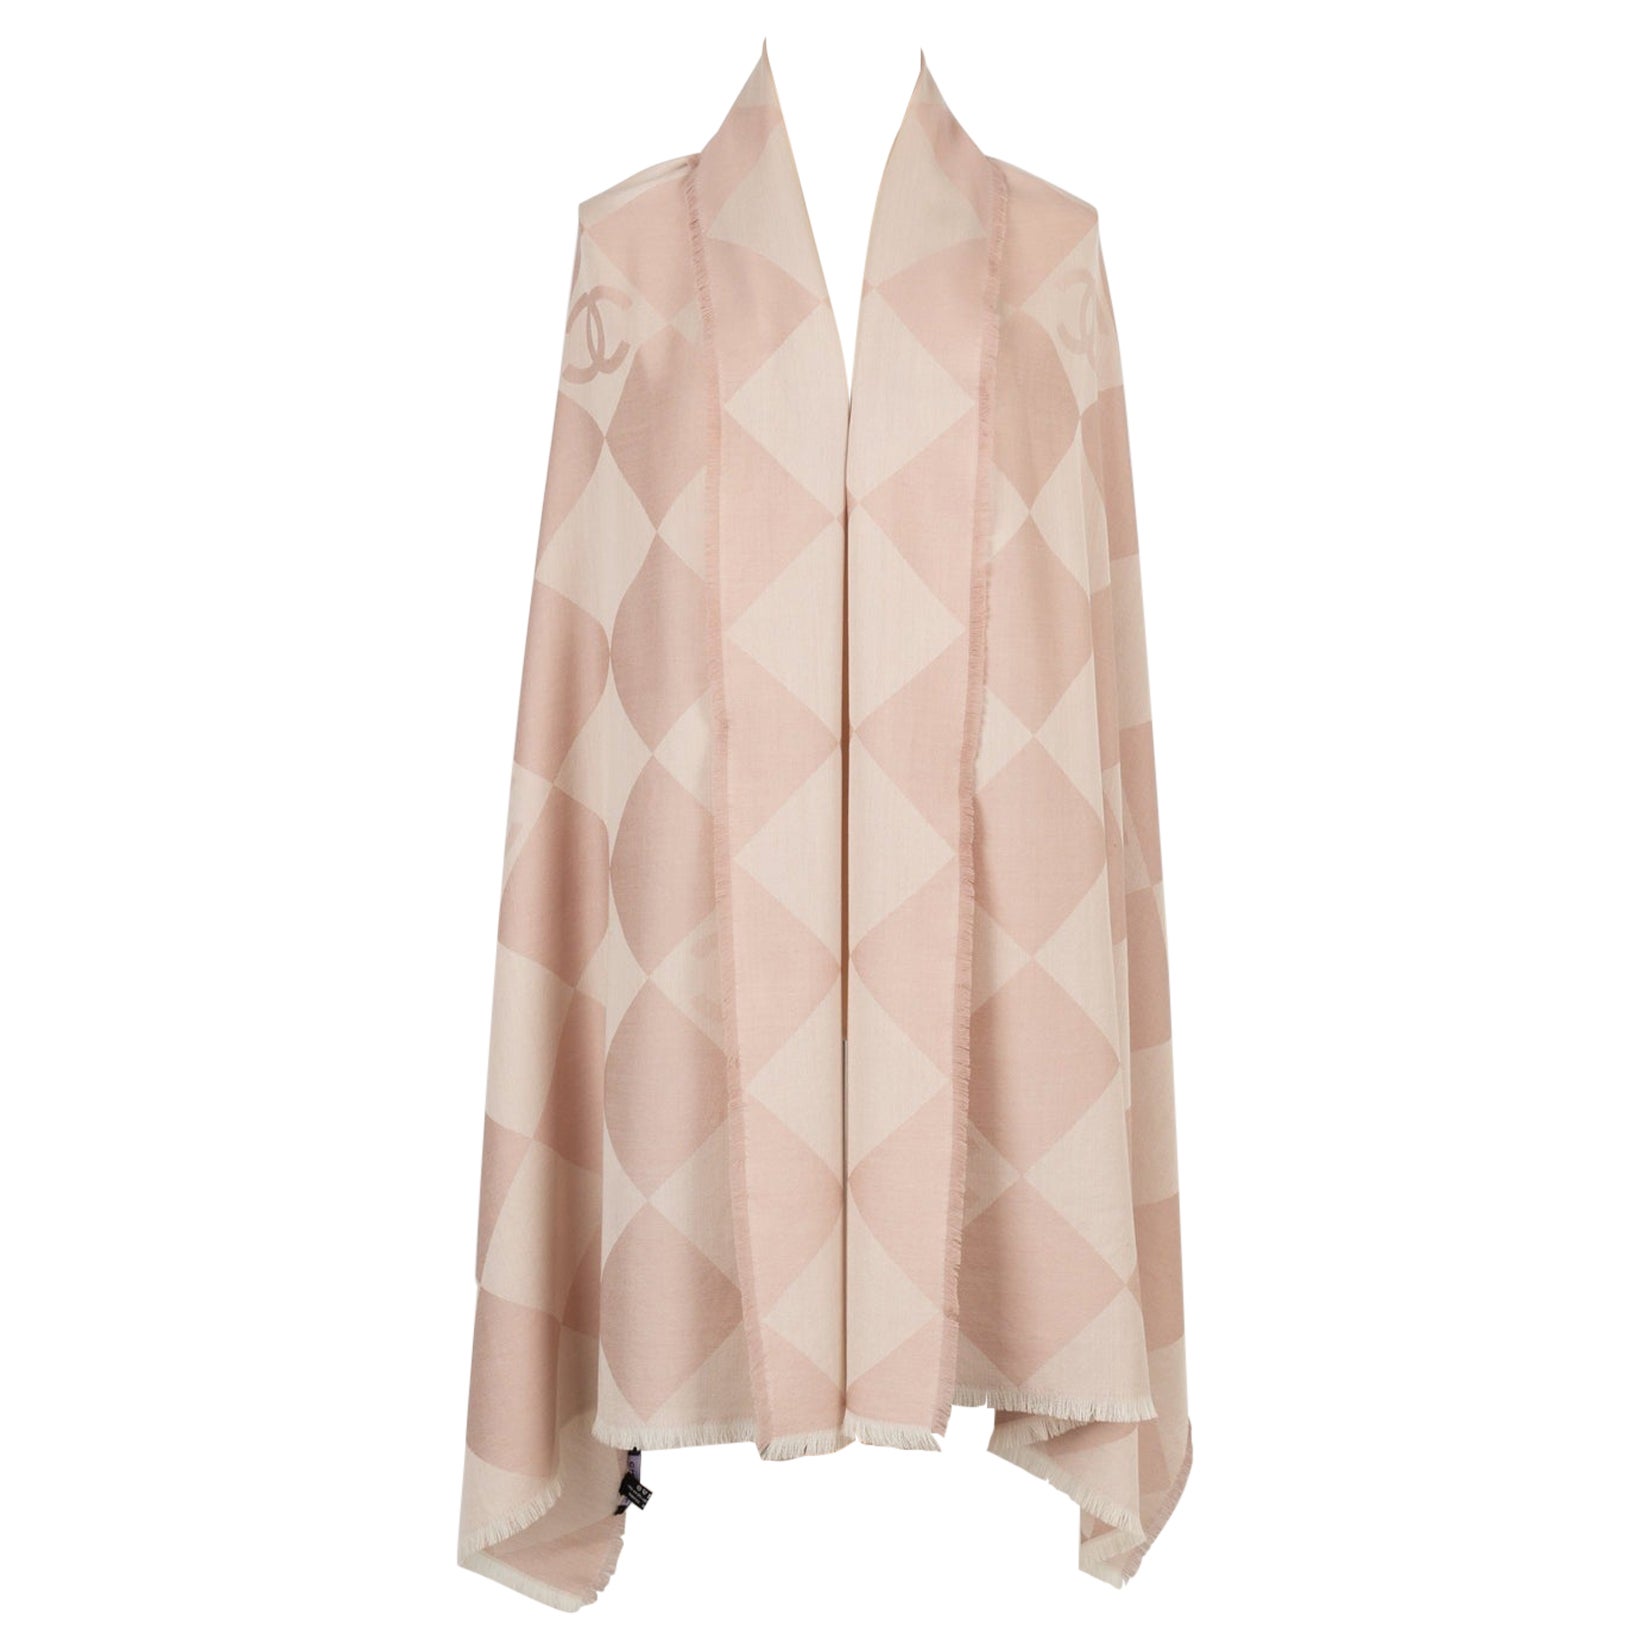 Chanel Cashmere Stole in Pink Tones For Sale